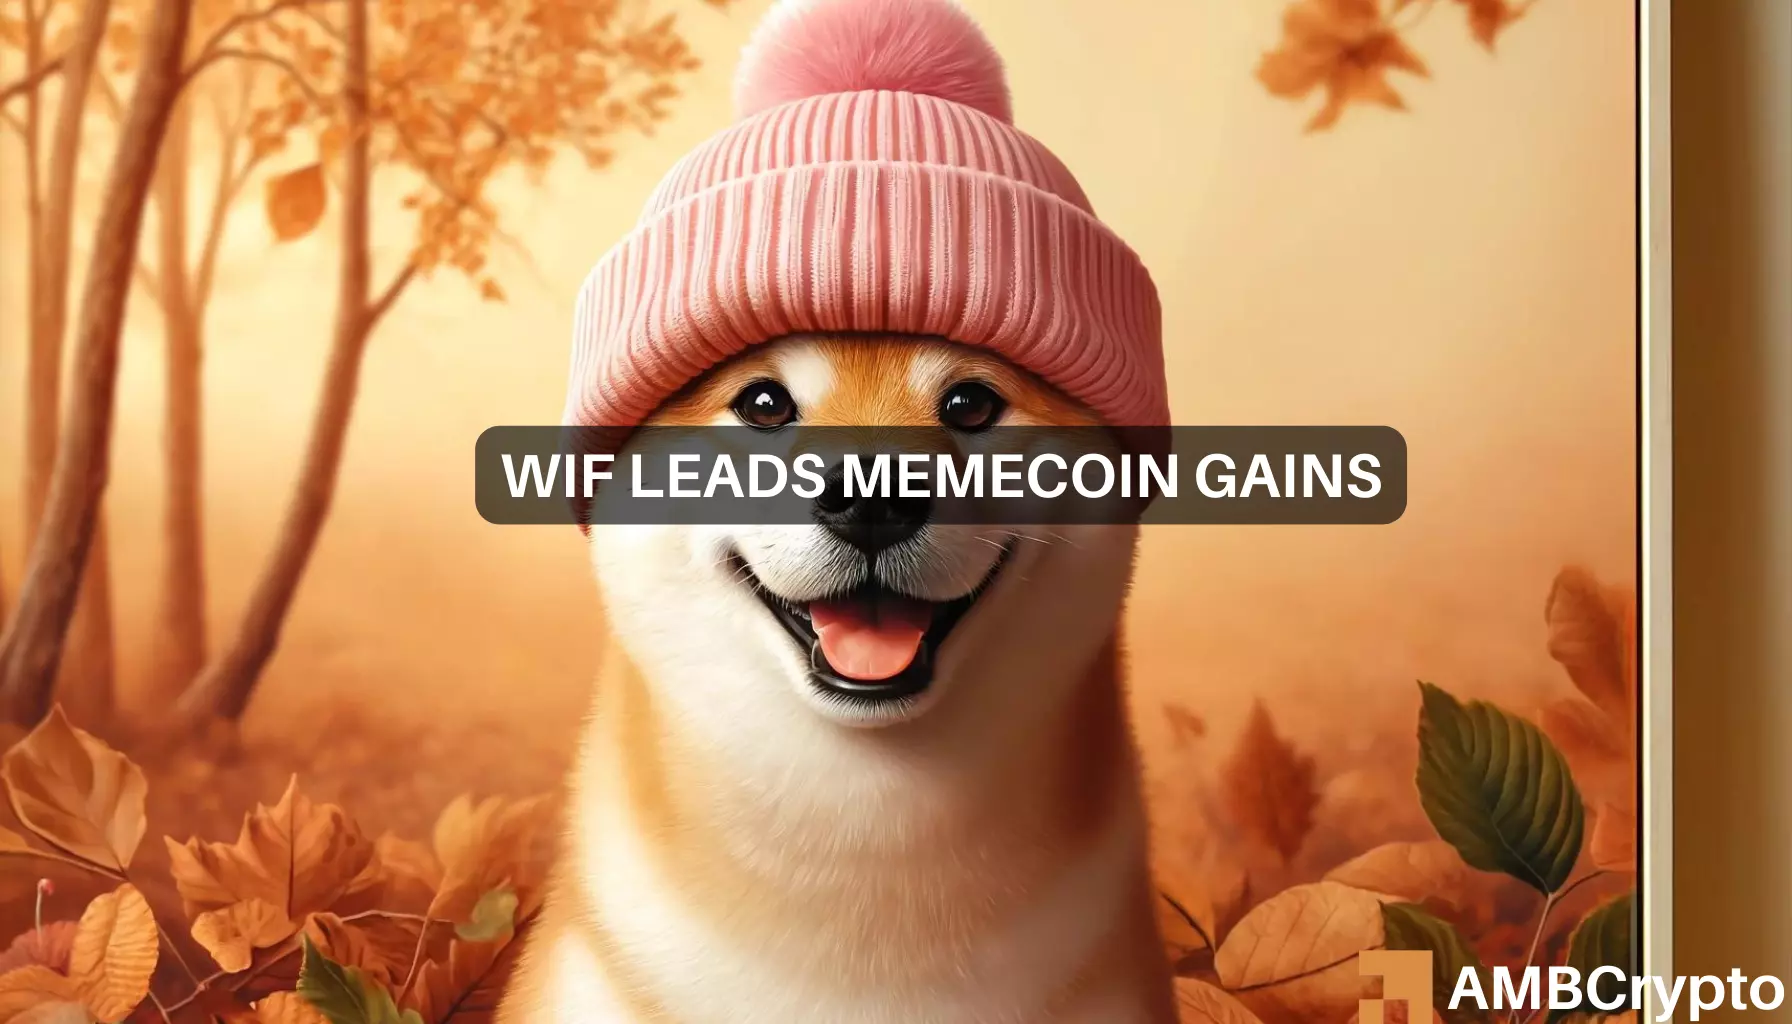 dogwifhat dominates memecoins, jumps 20% in a week: What’s next?